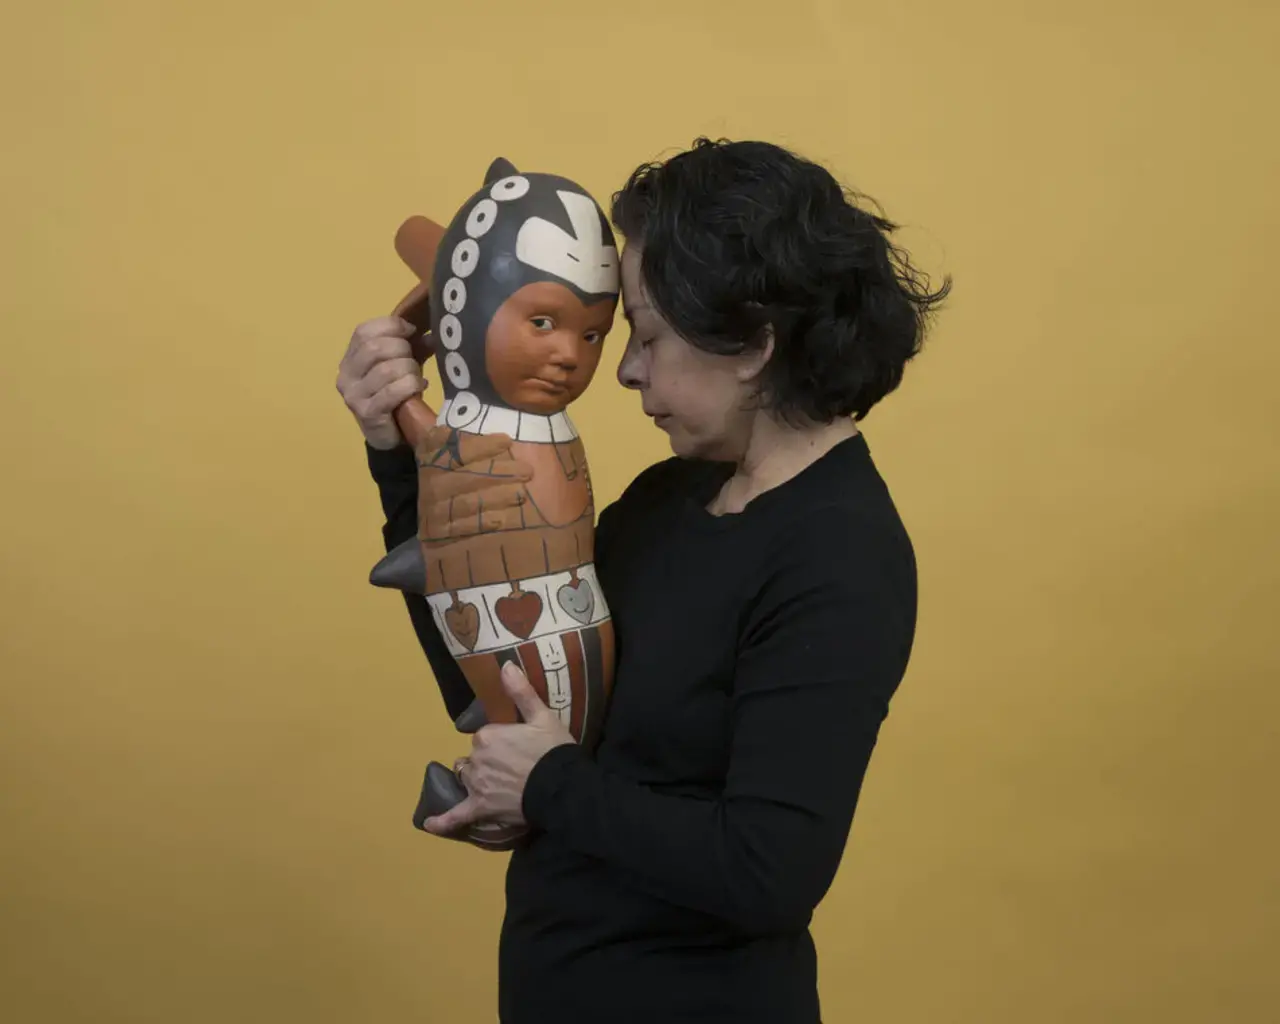 Pew Fellow Kukuli Velarde poses with a ceramic sculpture from her series&nbsp;A Mi Vida,&nbsp;part of the exhibition&nbsp;Making Place Matter&nbsp;at The Clay Studio, Philadelphia. Photo by John Carlano.